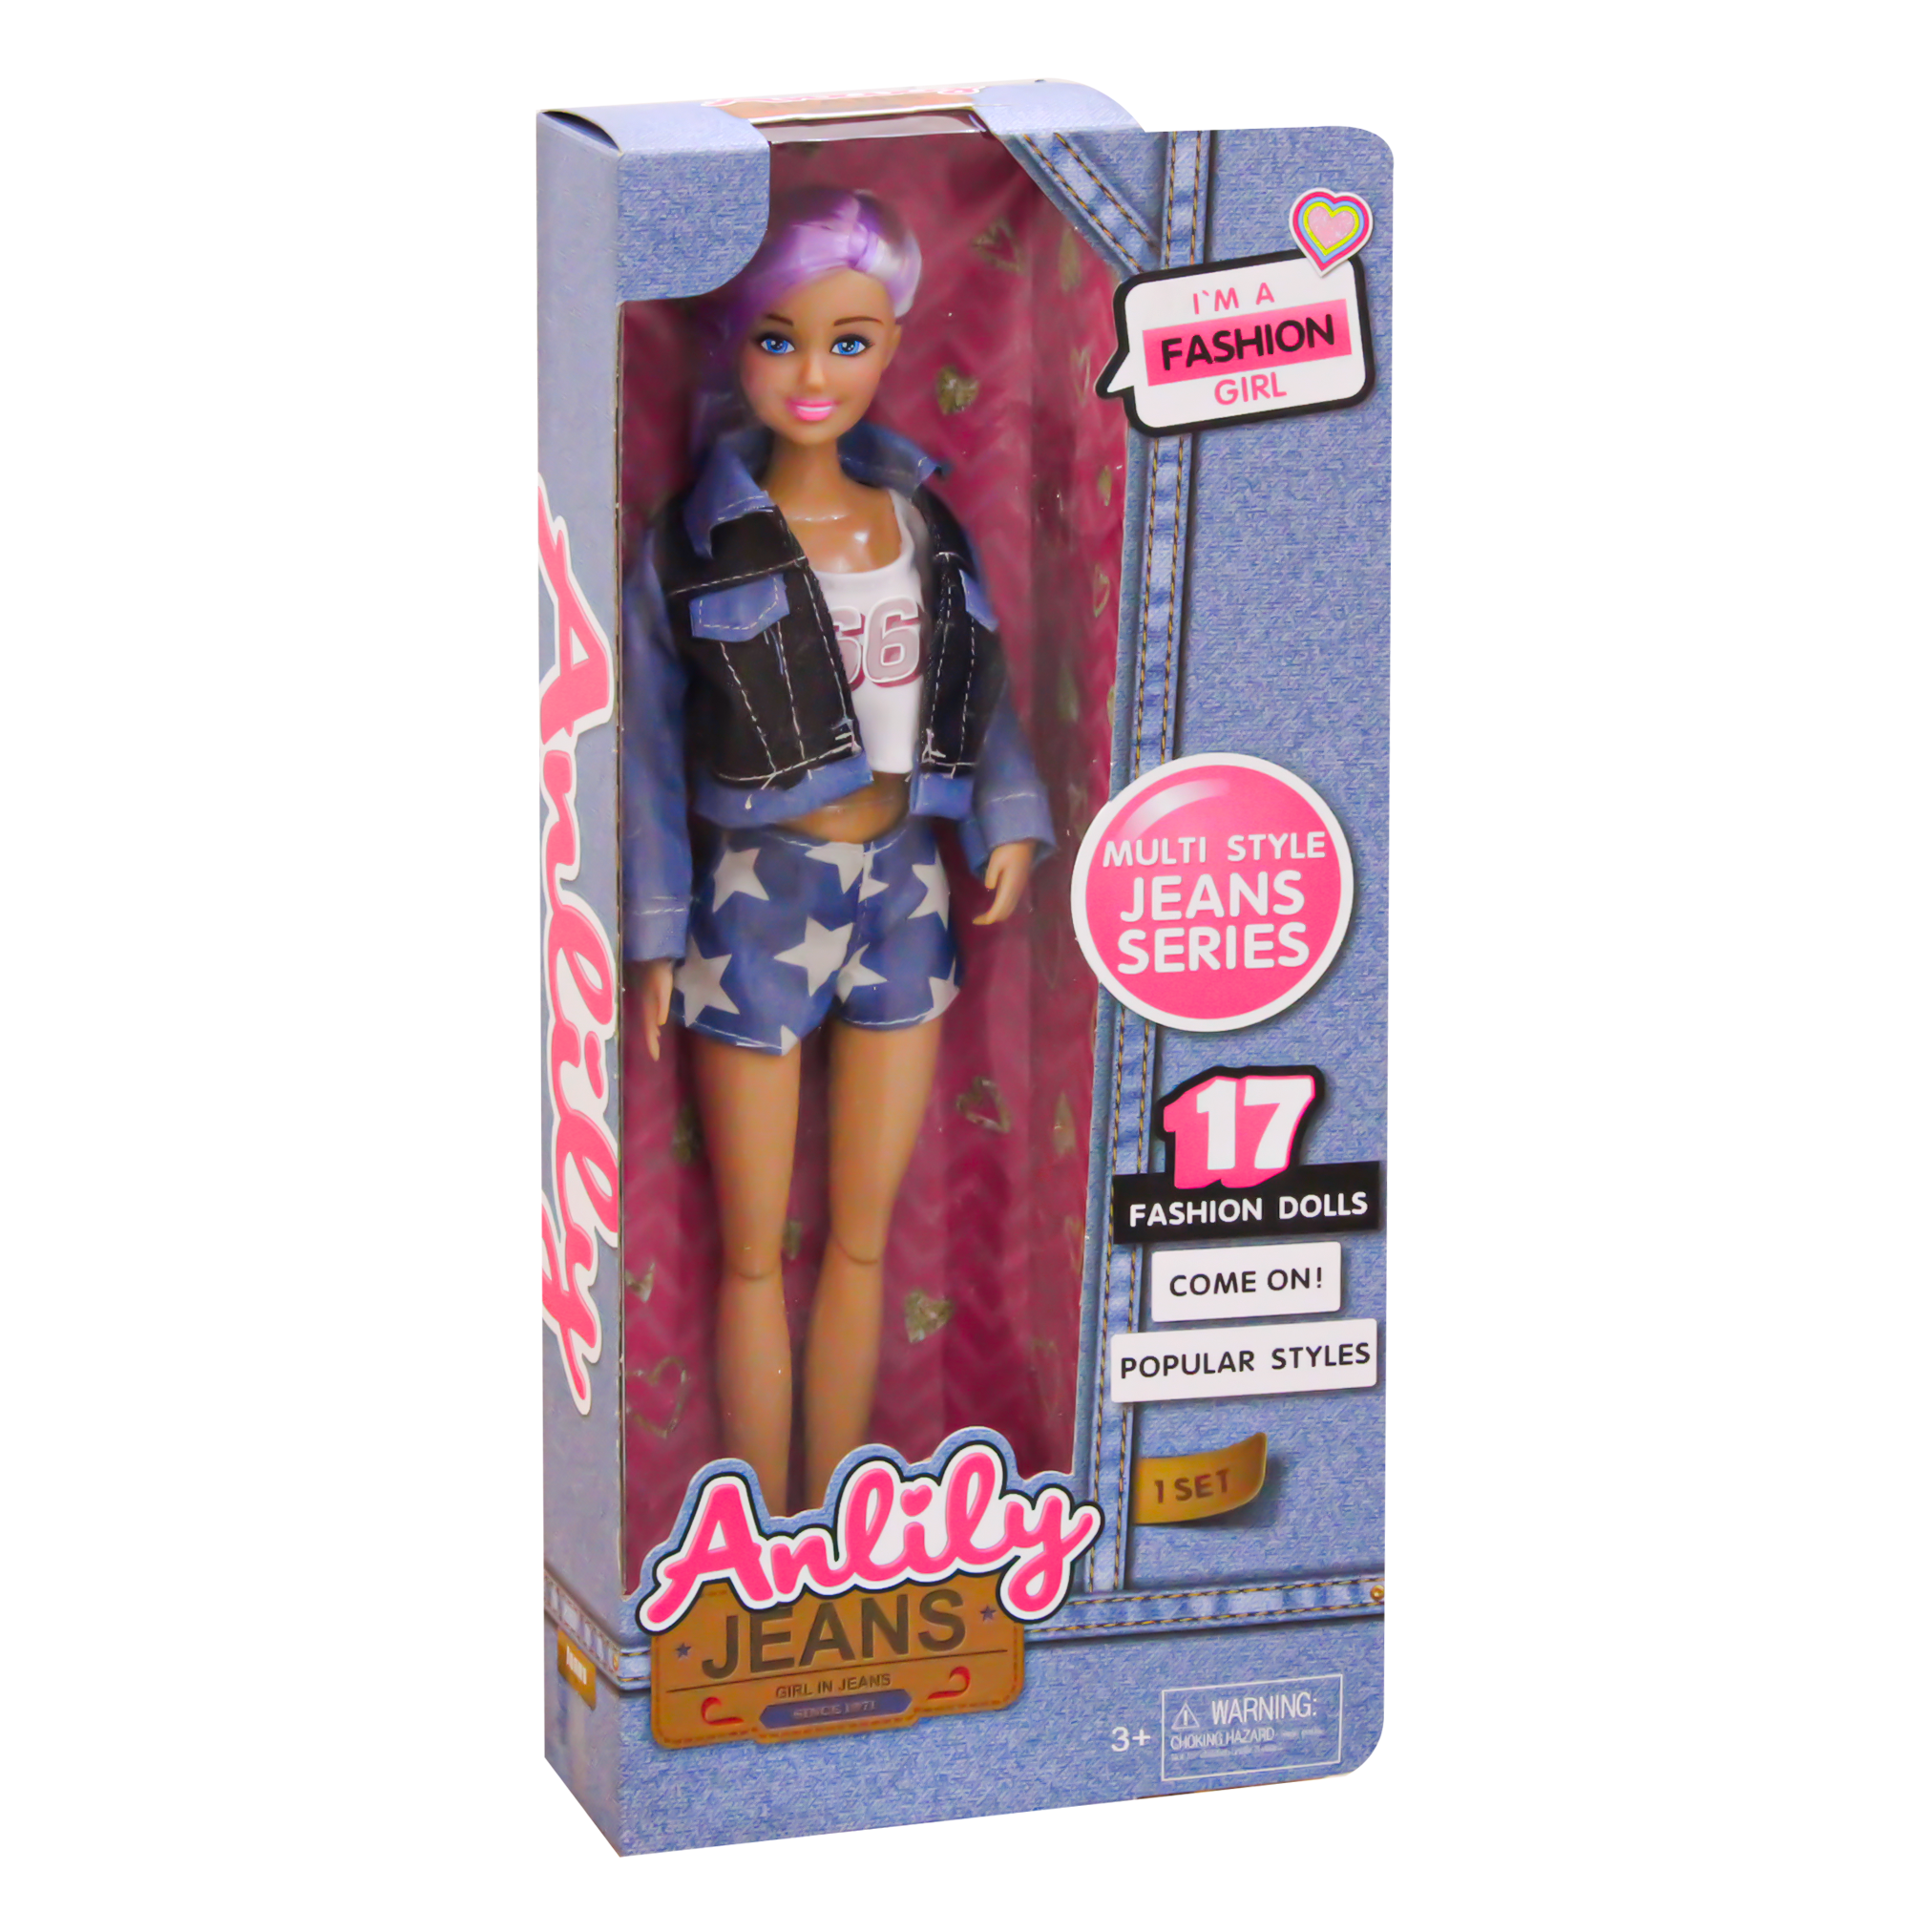 Anlily Fashion Style doll with Jeans Hot Short , grey basic and Jeans Jacket